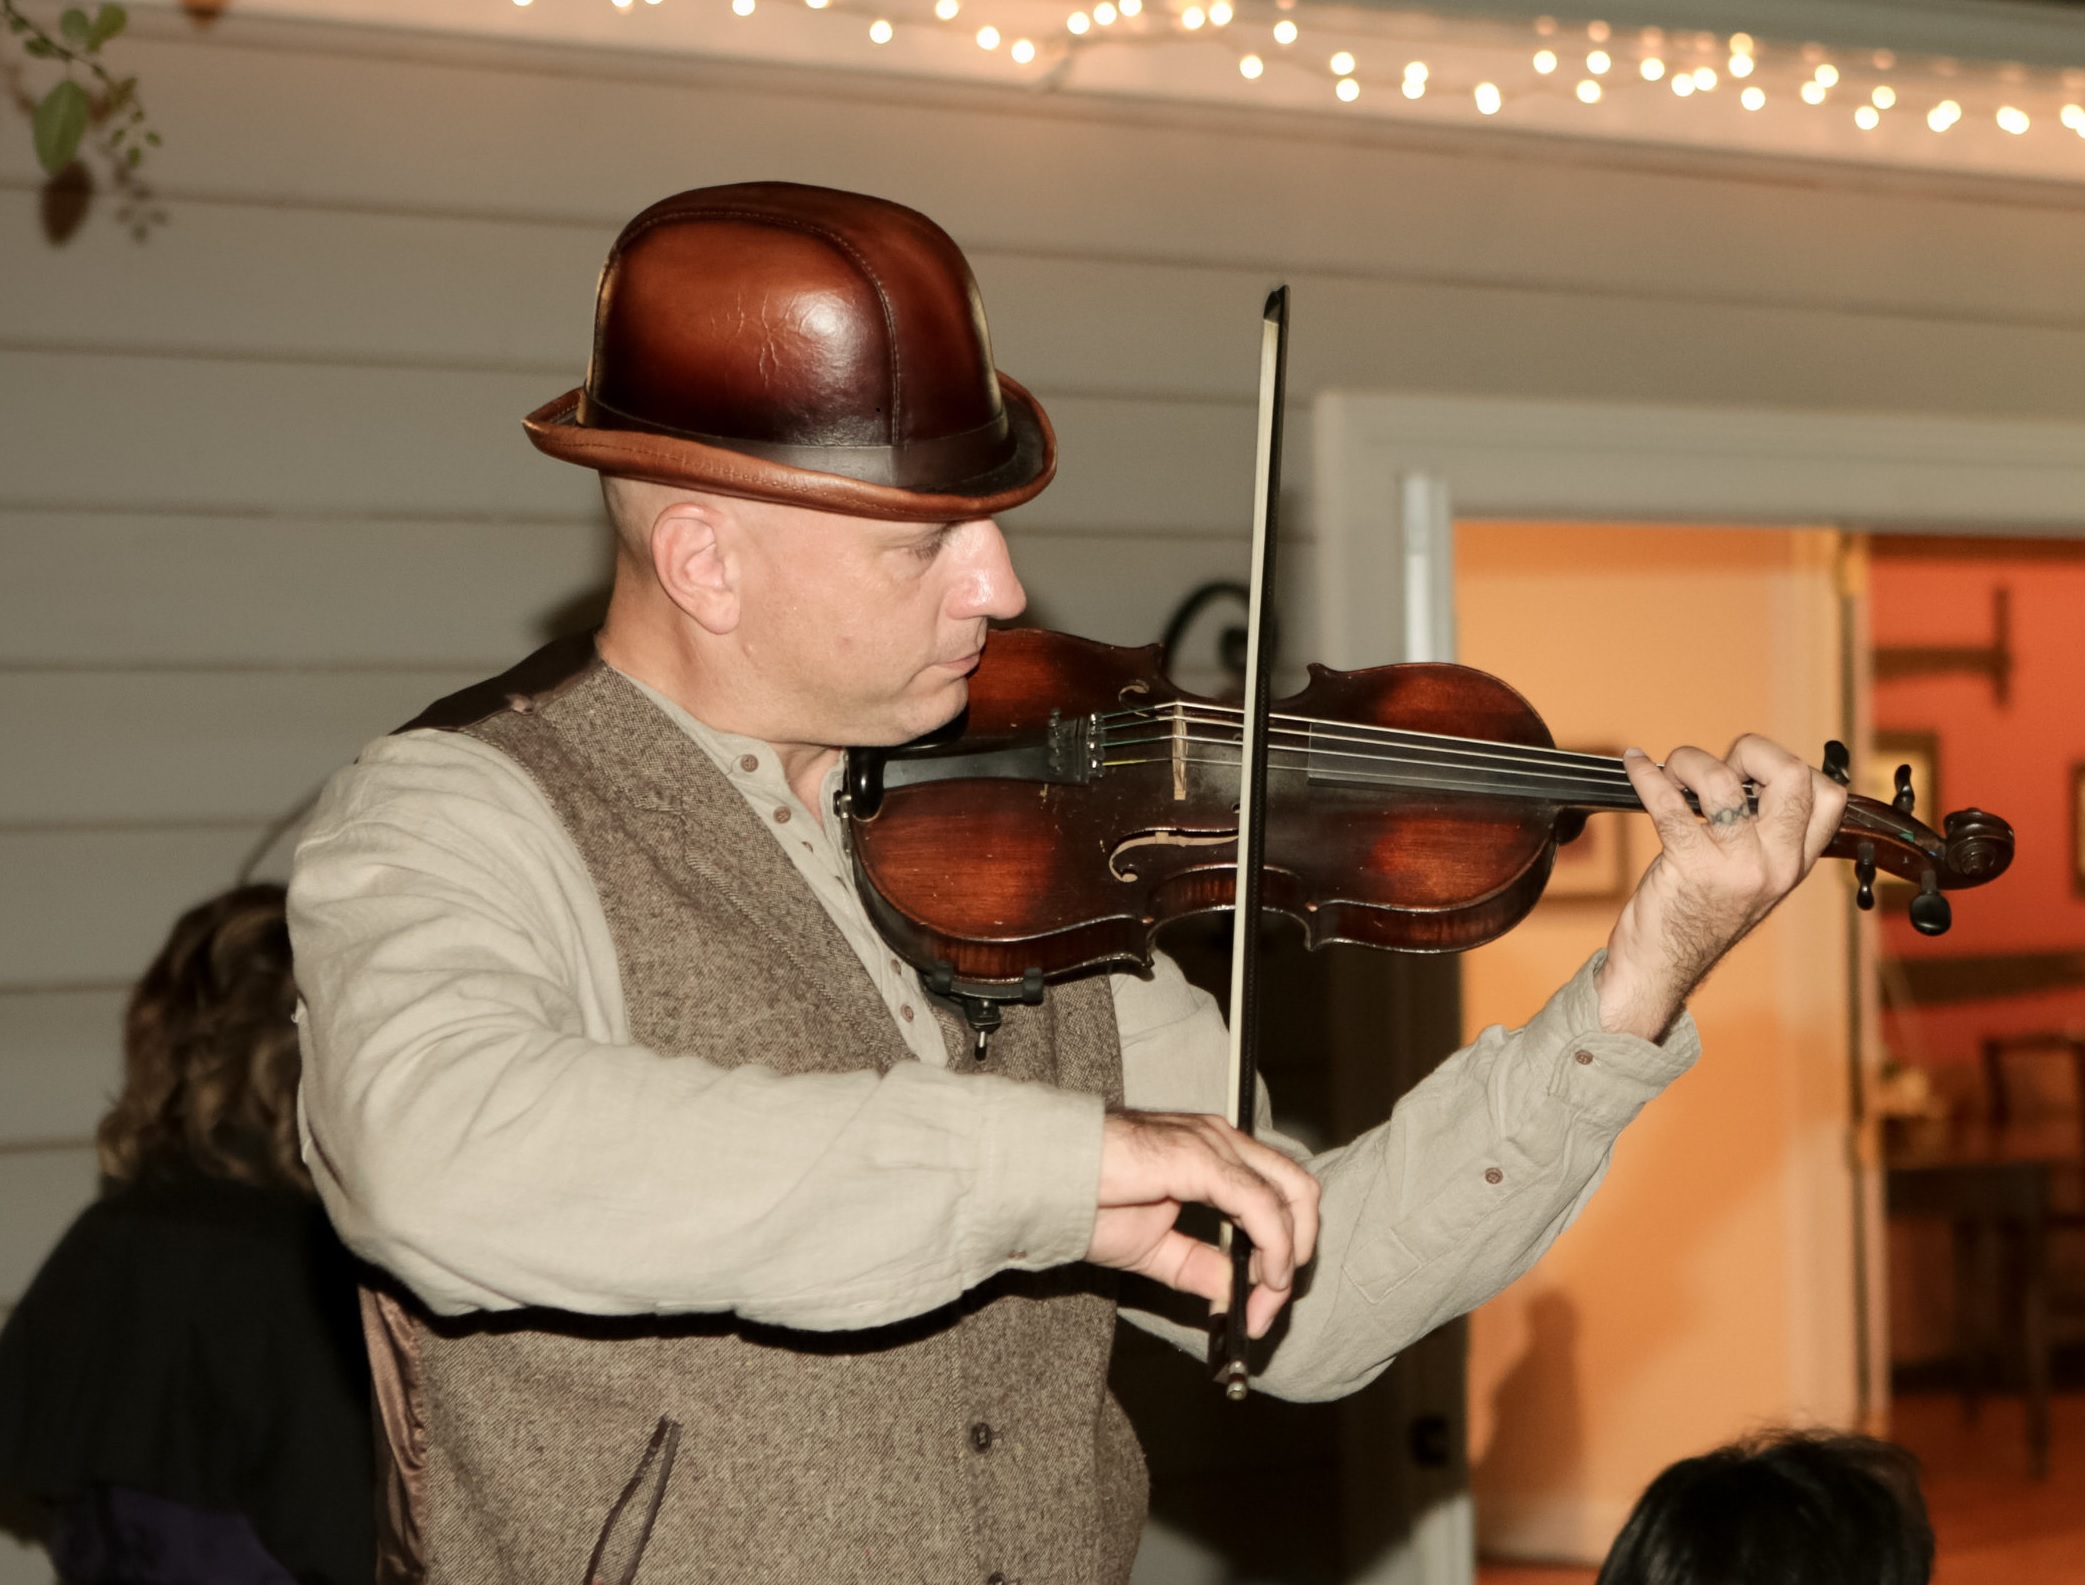 Person in a brown bowler hat playing an violin in a dark beige tweed jacket and a light beige undershirt. The background is of a private residence, side of the house. Picture appears to be candid.